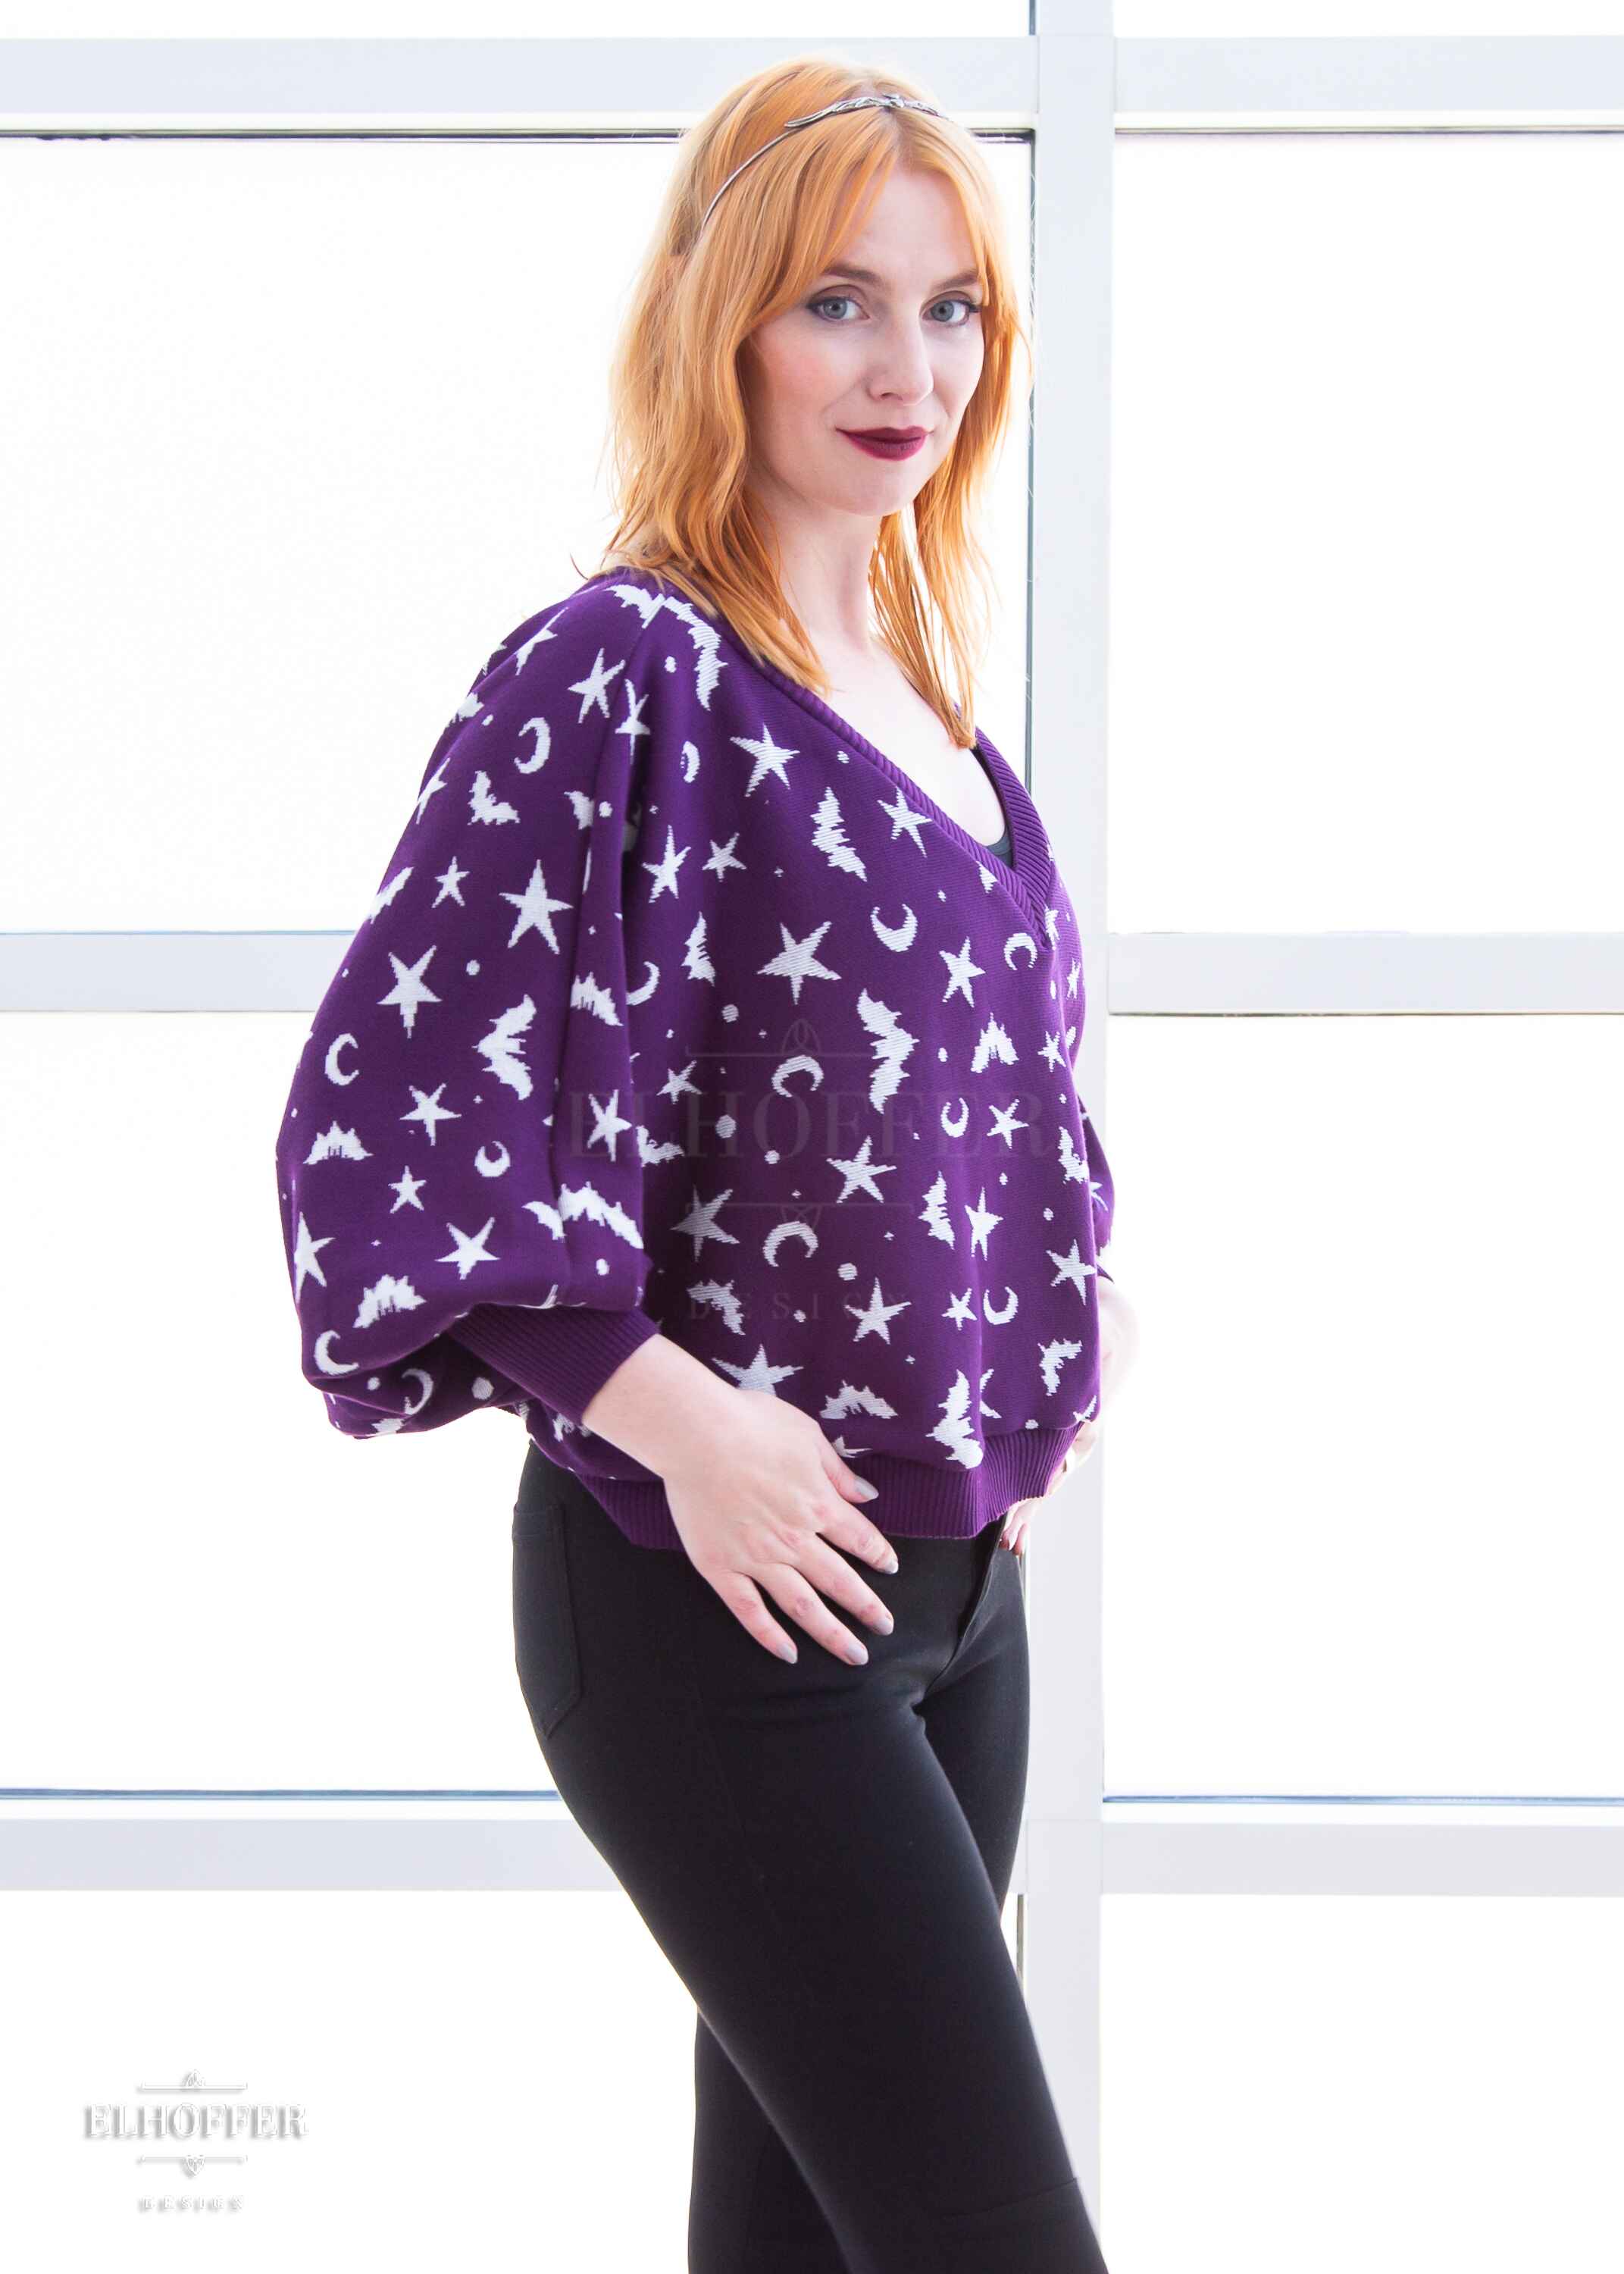 Harley, a fair skinned S model with shoulder length strawberry blonde hair, is wearing an oversized v neck cropped sweater with batwing sleeves that gather at the wrist. The main body of the sweater is purple with a white bat, star, moon, and dot pattern repeated throughout.